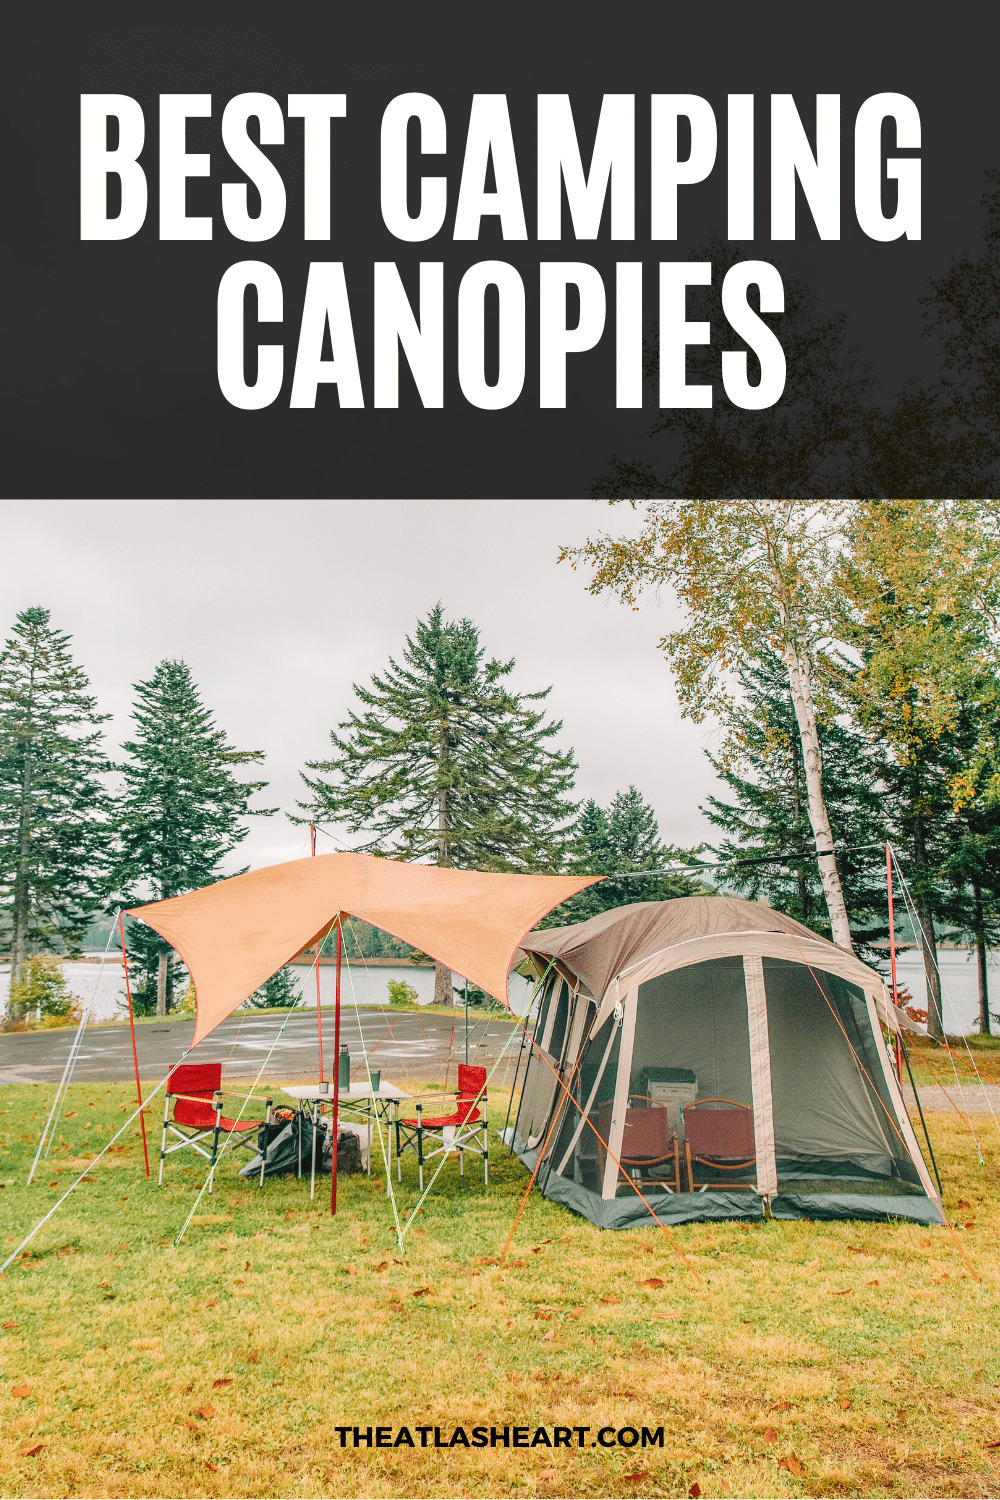 12 Best Camping Canopies to Stay Dry and Shaded on Your Next Trip